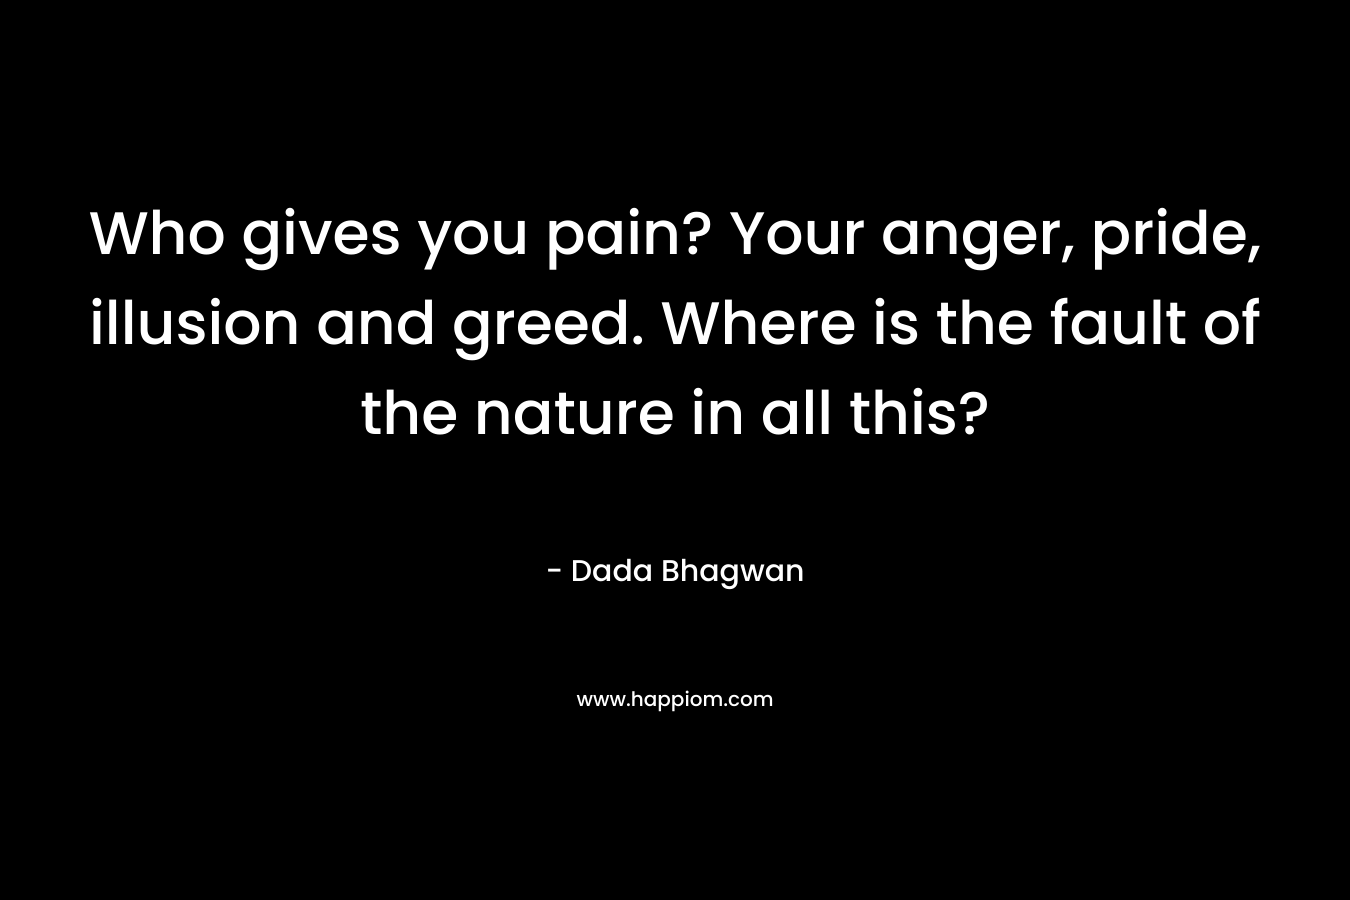 Who gives you pain? Your anger, pride, illusion and greed. Where is the fault of the nature in all this?